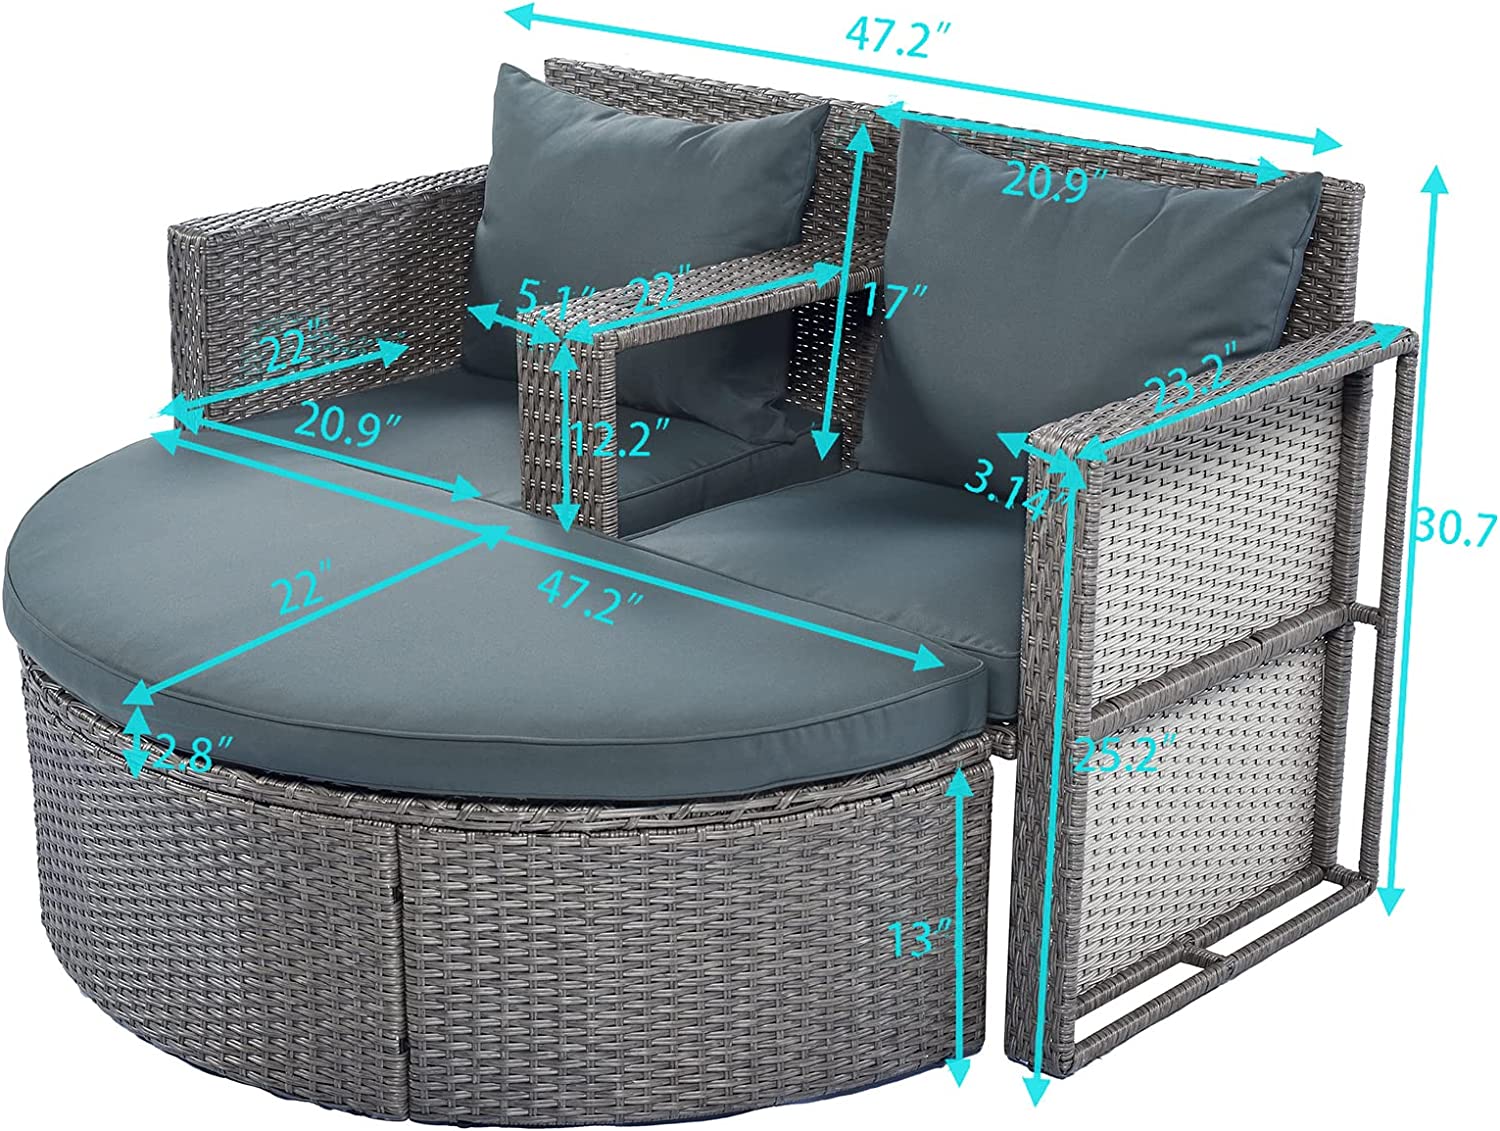 Outdoor Garden Patio Sofa Sets with Side Table for Umbrella, SEGMART Newest 2 Pieces Wicker Patio Furniture Set with Removable Seat Cushions & Half-Moon Sofa for Porch, Backyard, 300lbs, S1542 - image 4 of 9